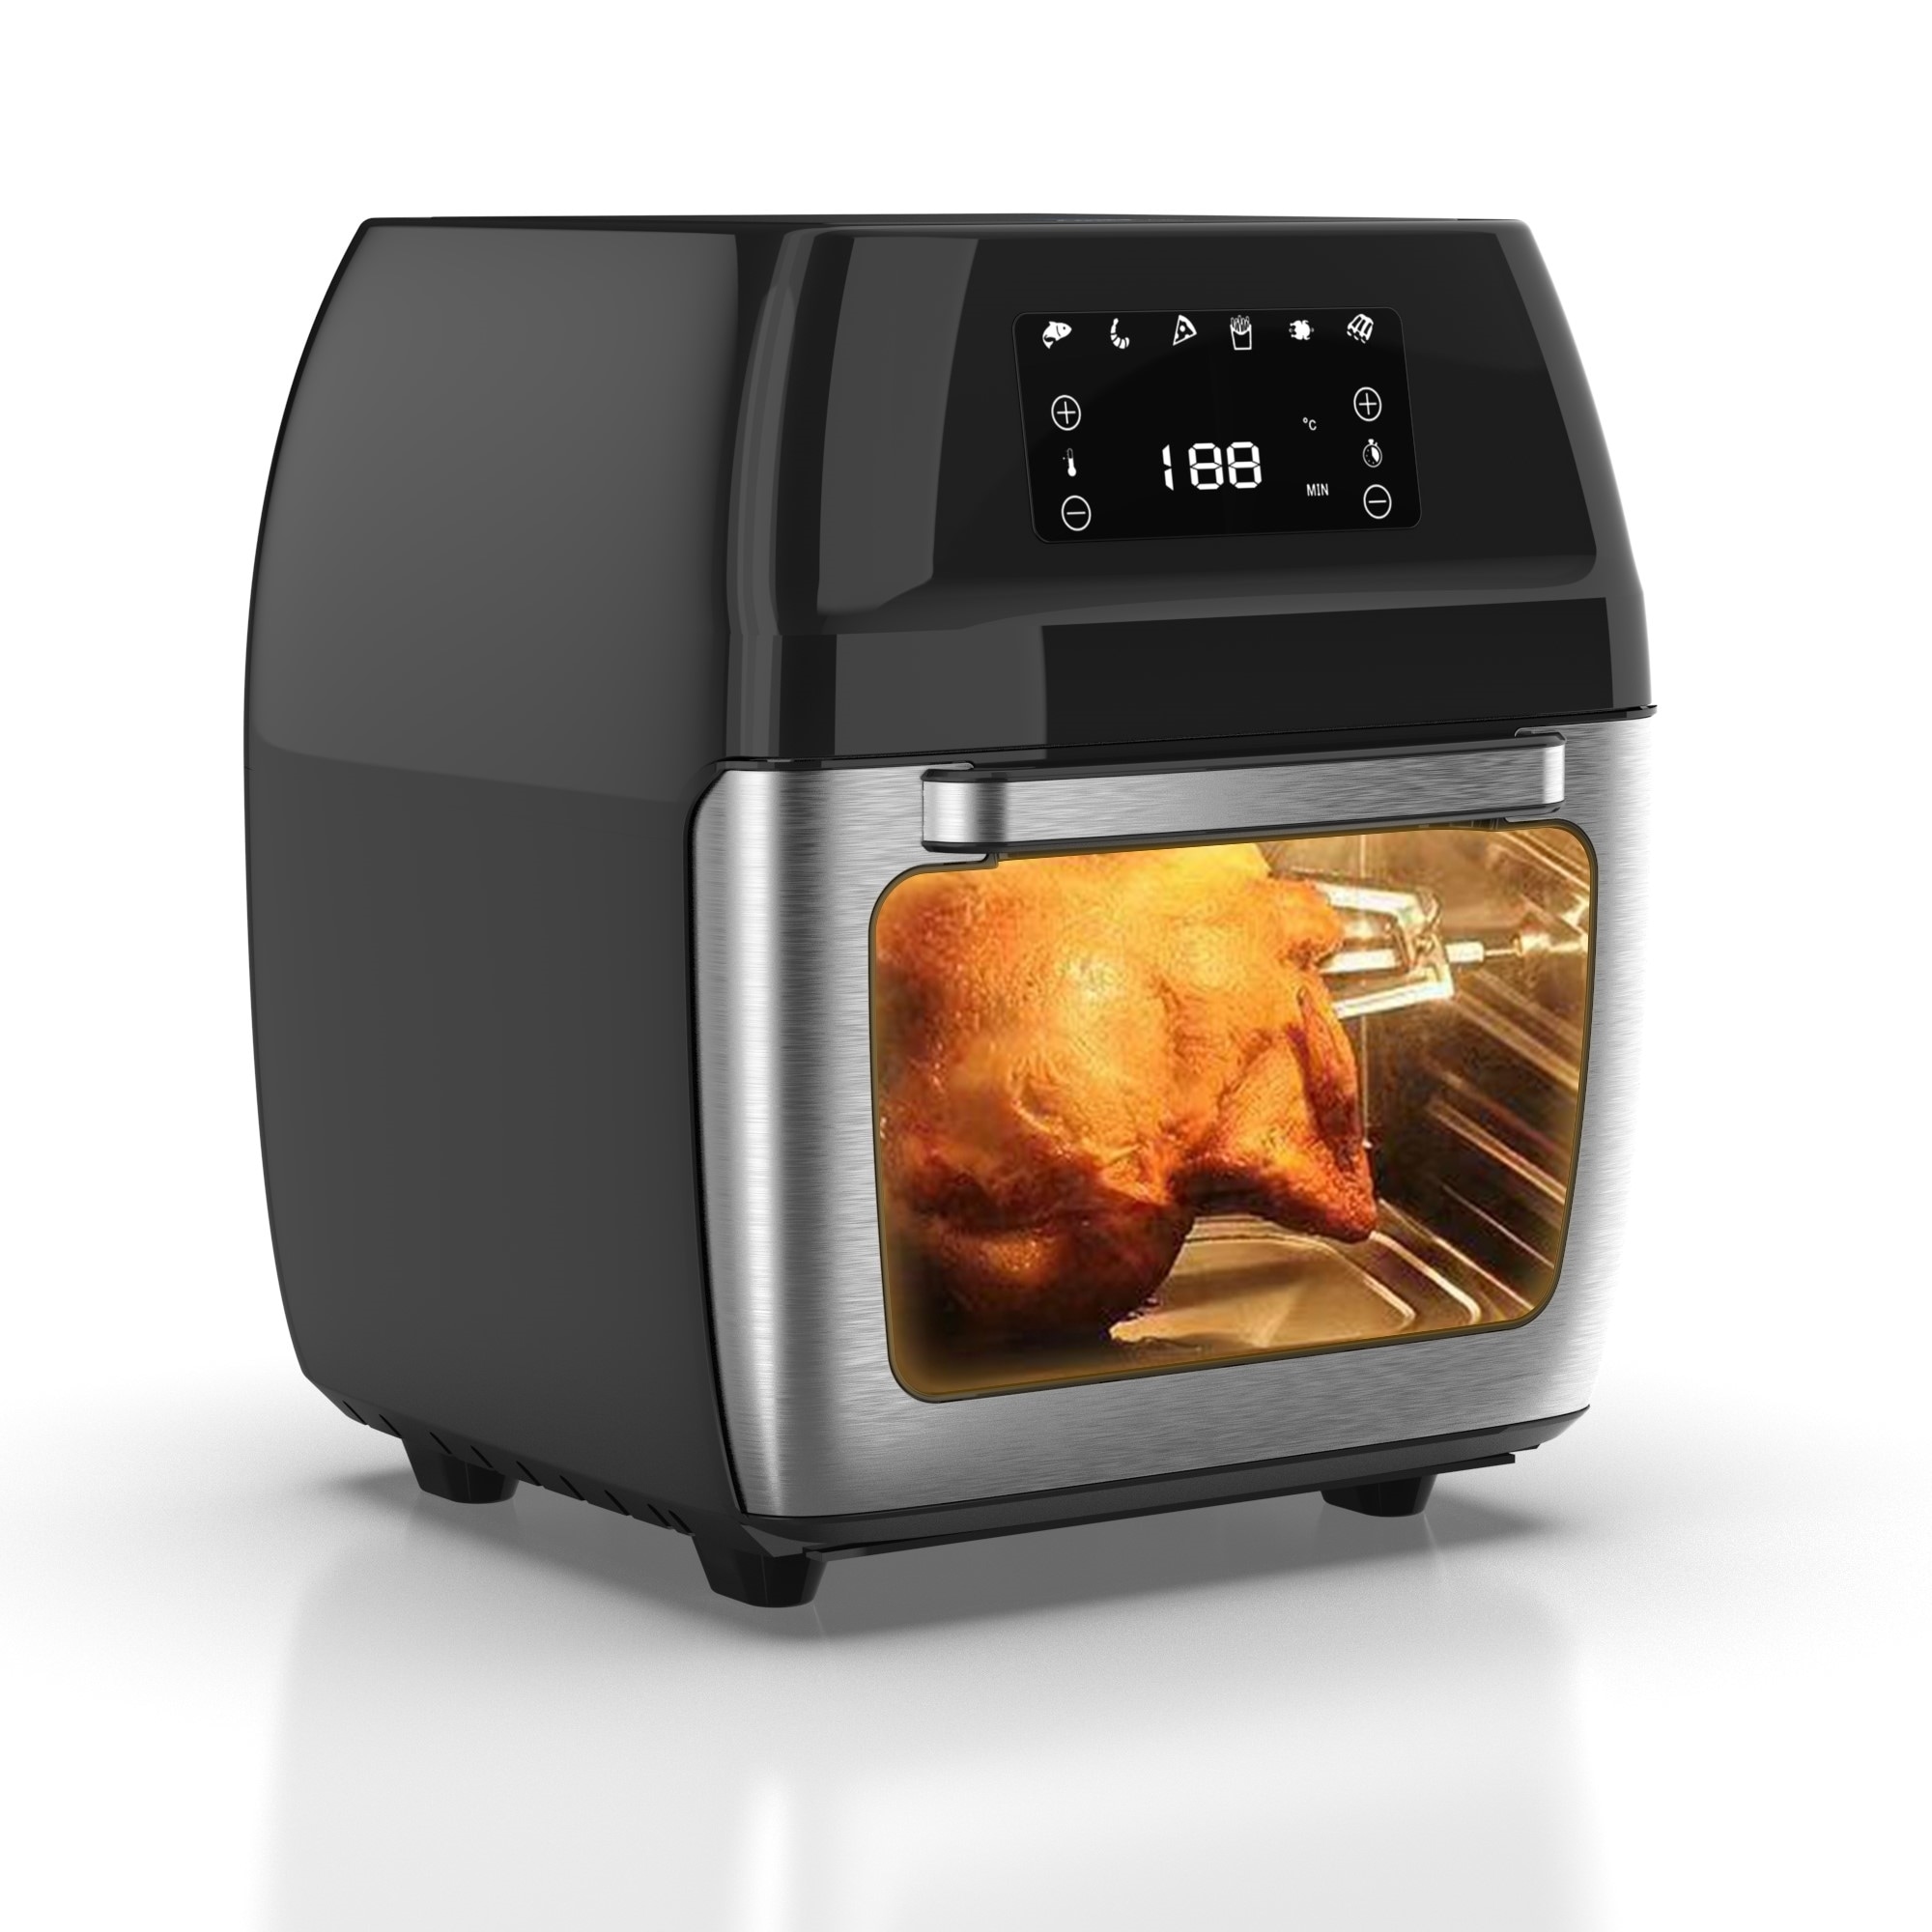  Convection Oven Countertop with Digital Touchscreen